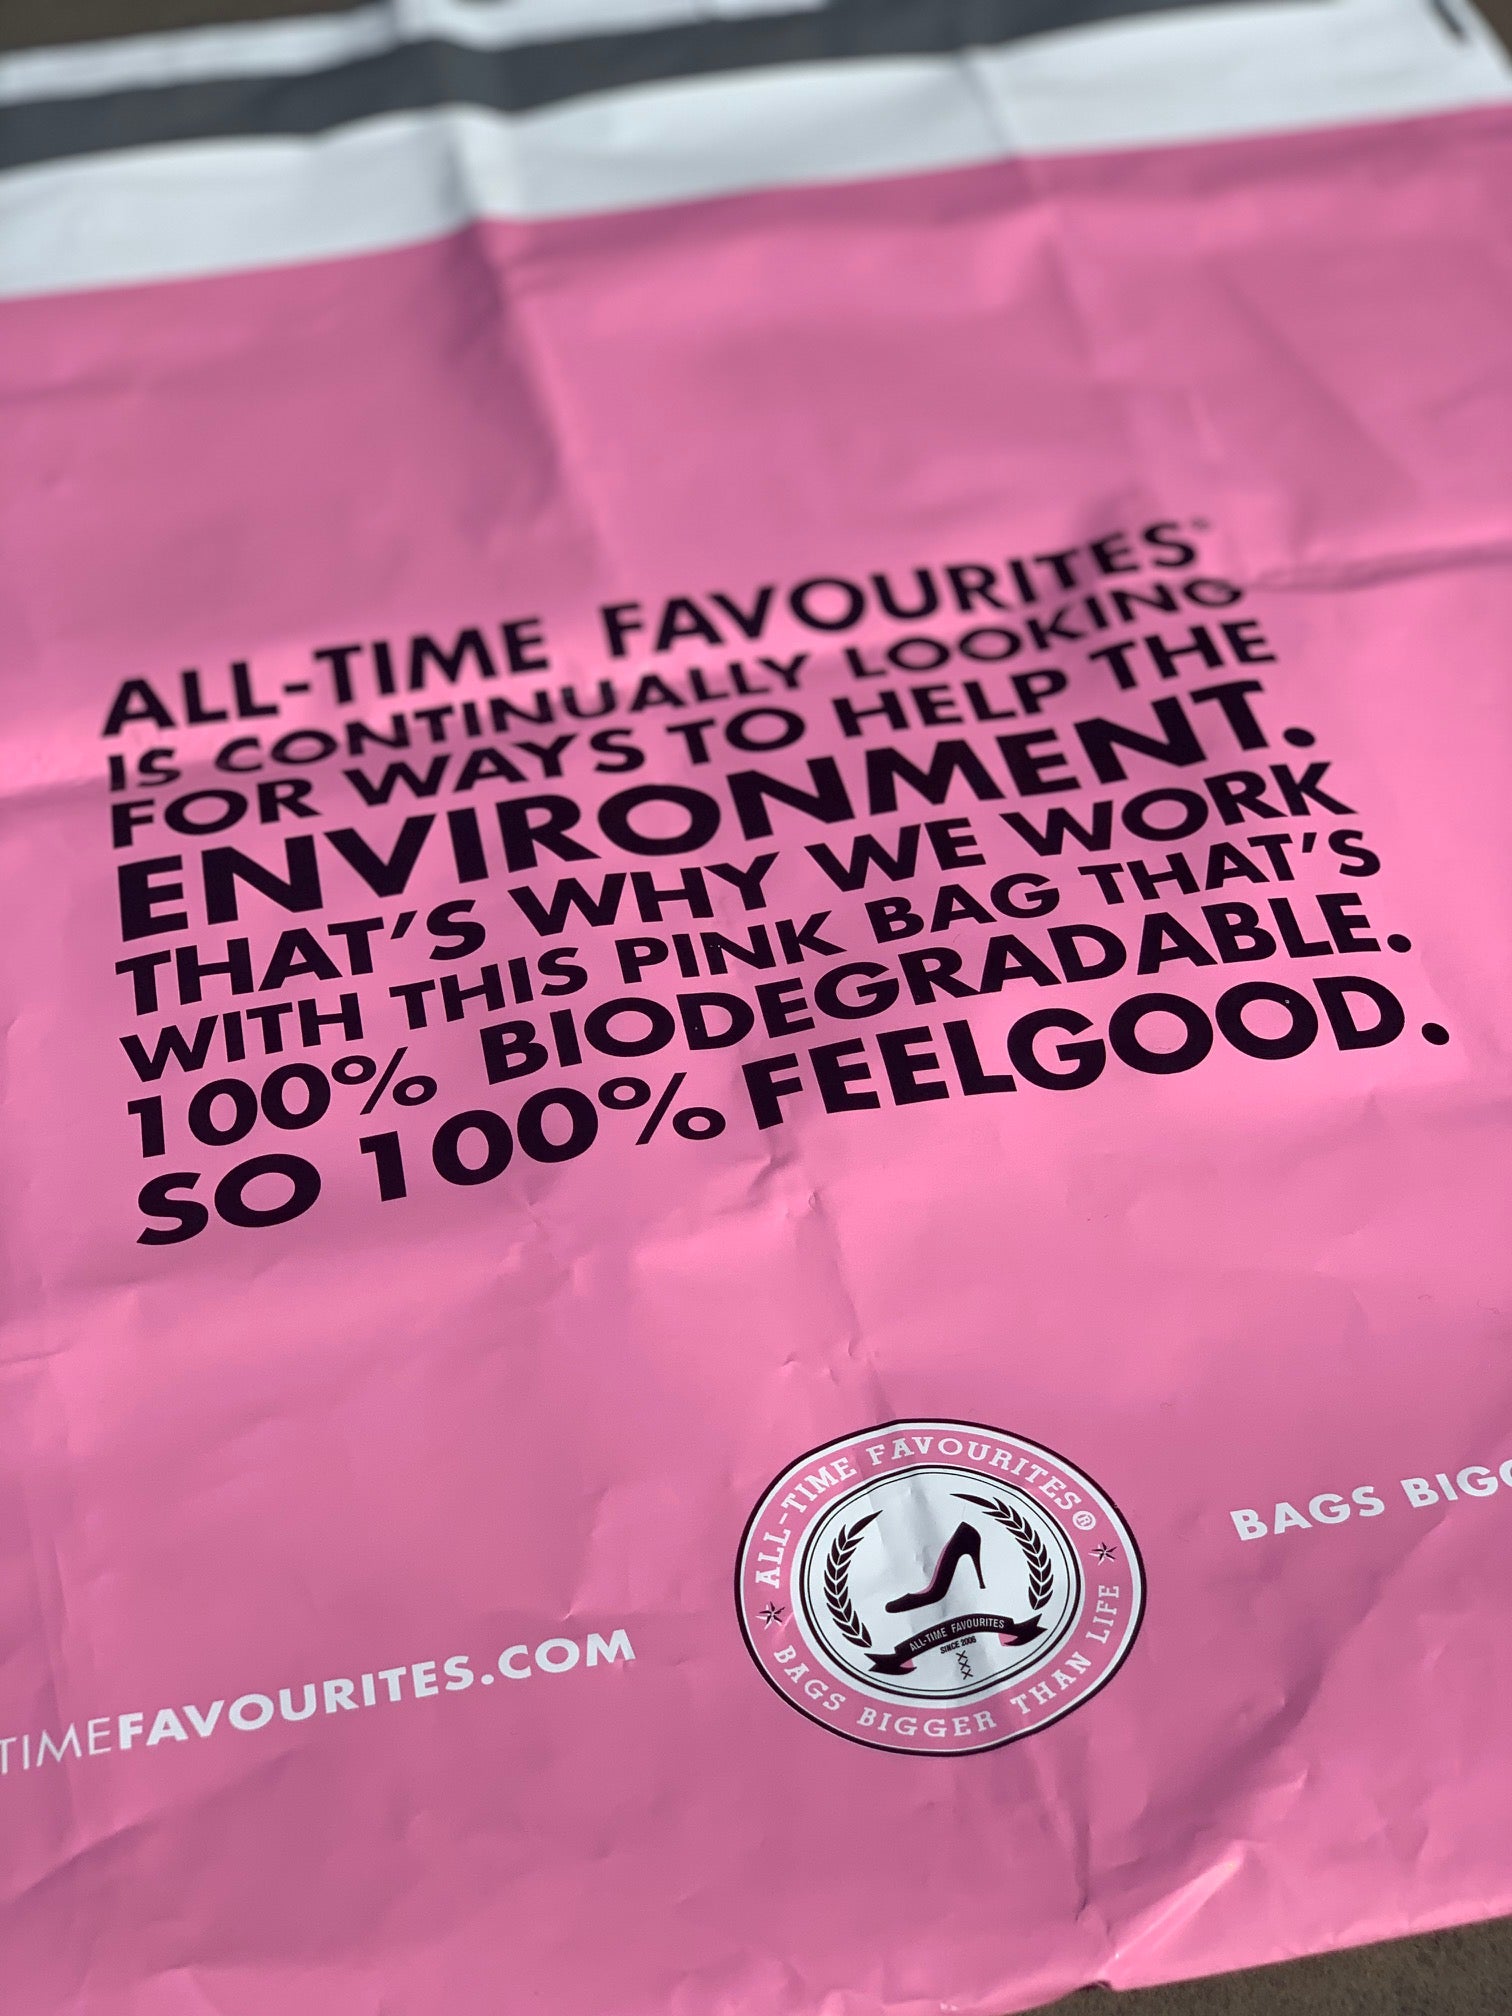 All-time Favourites Bags bigger than life